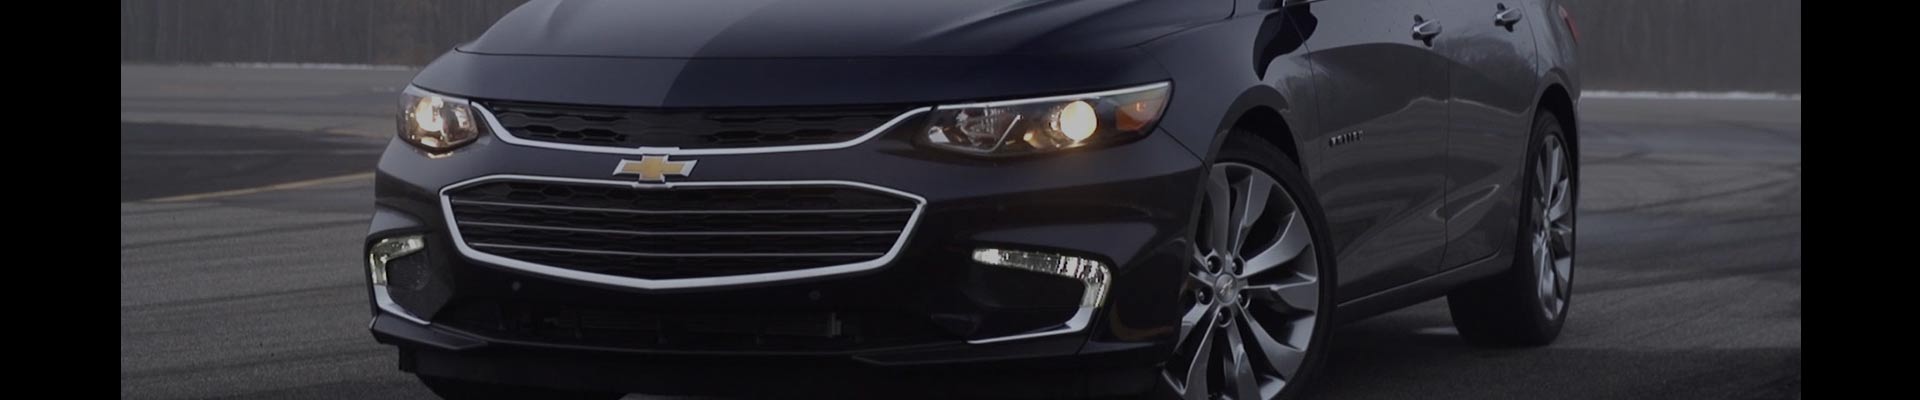 Shop Replacement and OEM Chevrolet Malibu Parts with Discounted Price on the Net